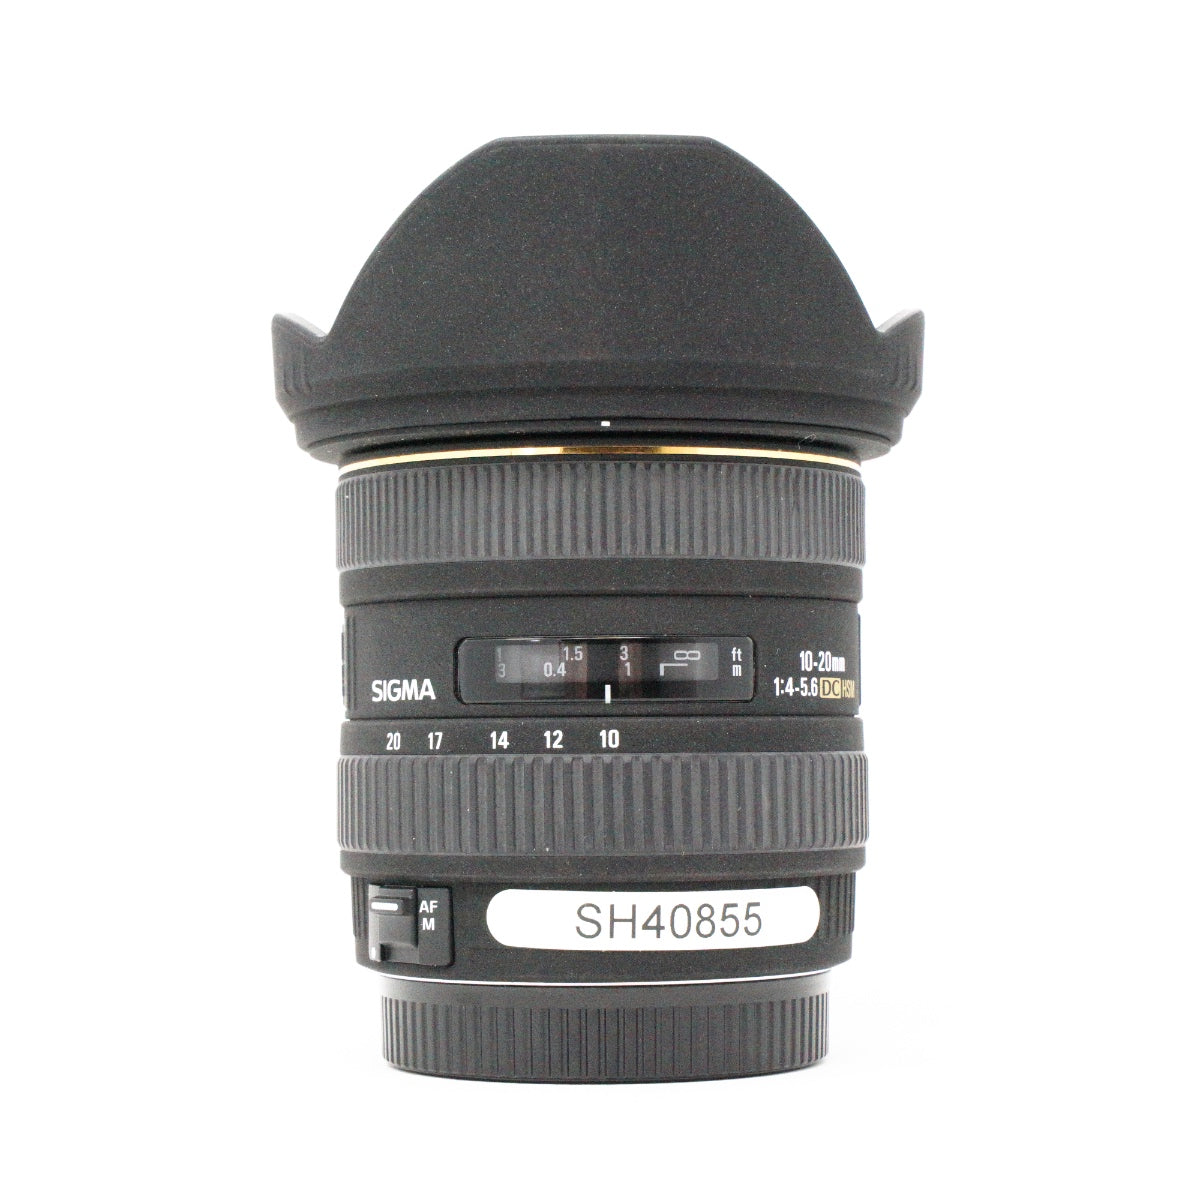 Used Sigma 10-20mm F4/5.6 wide angle zoom lens for Canon